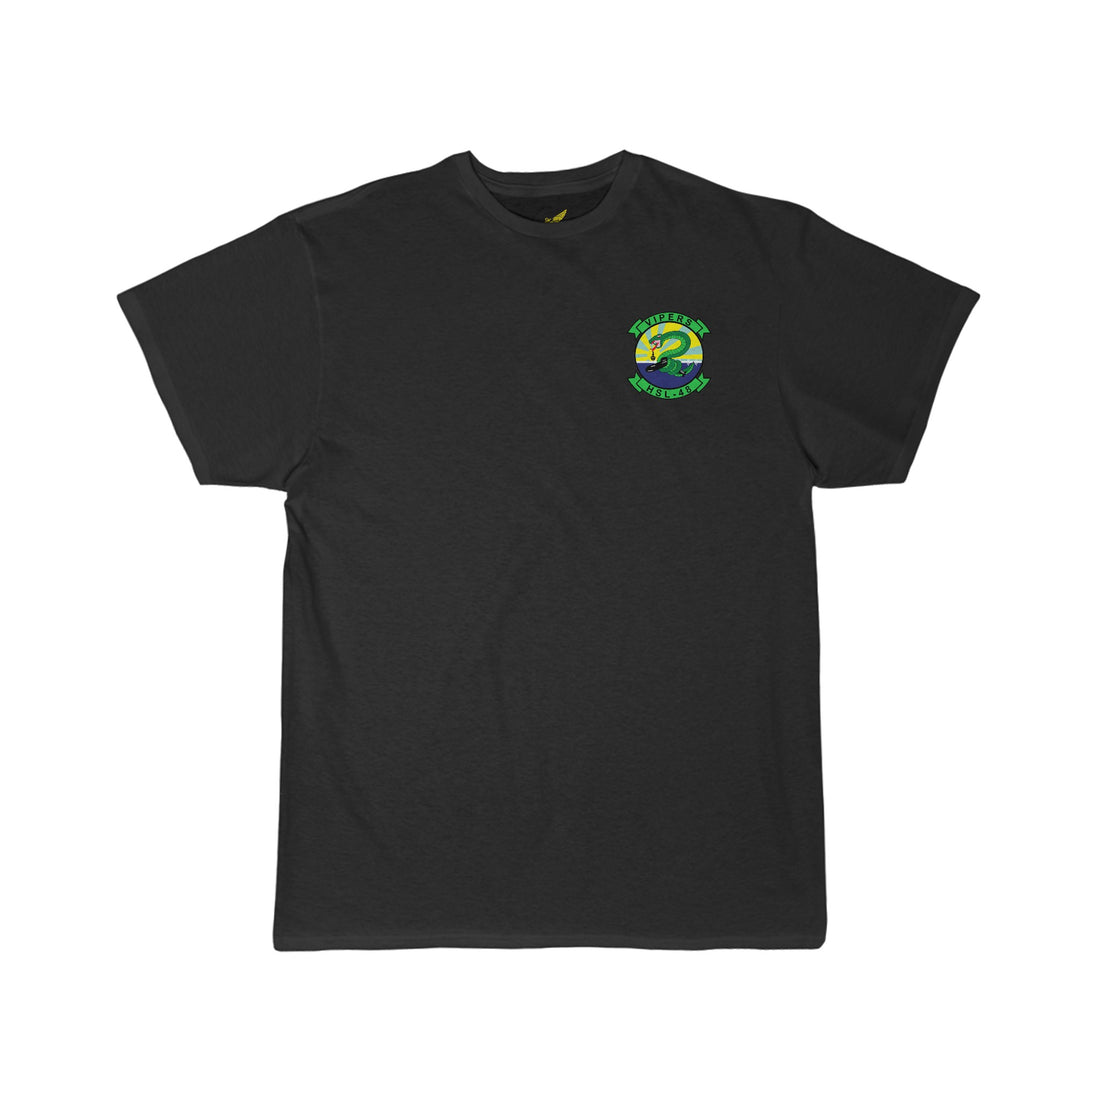 HSL-48 Vipers T-Shirt